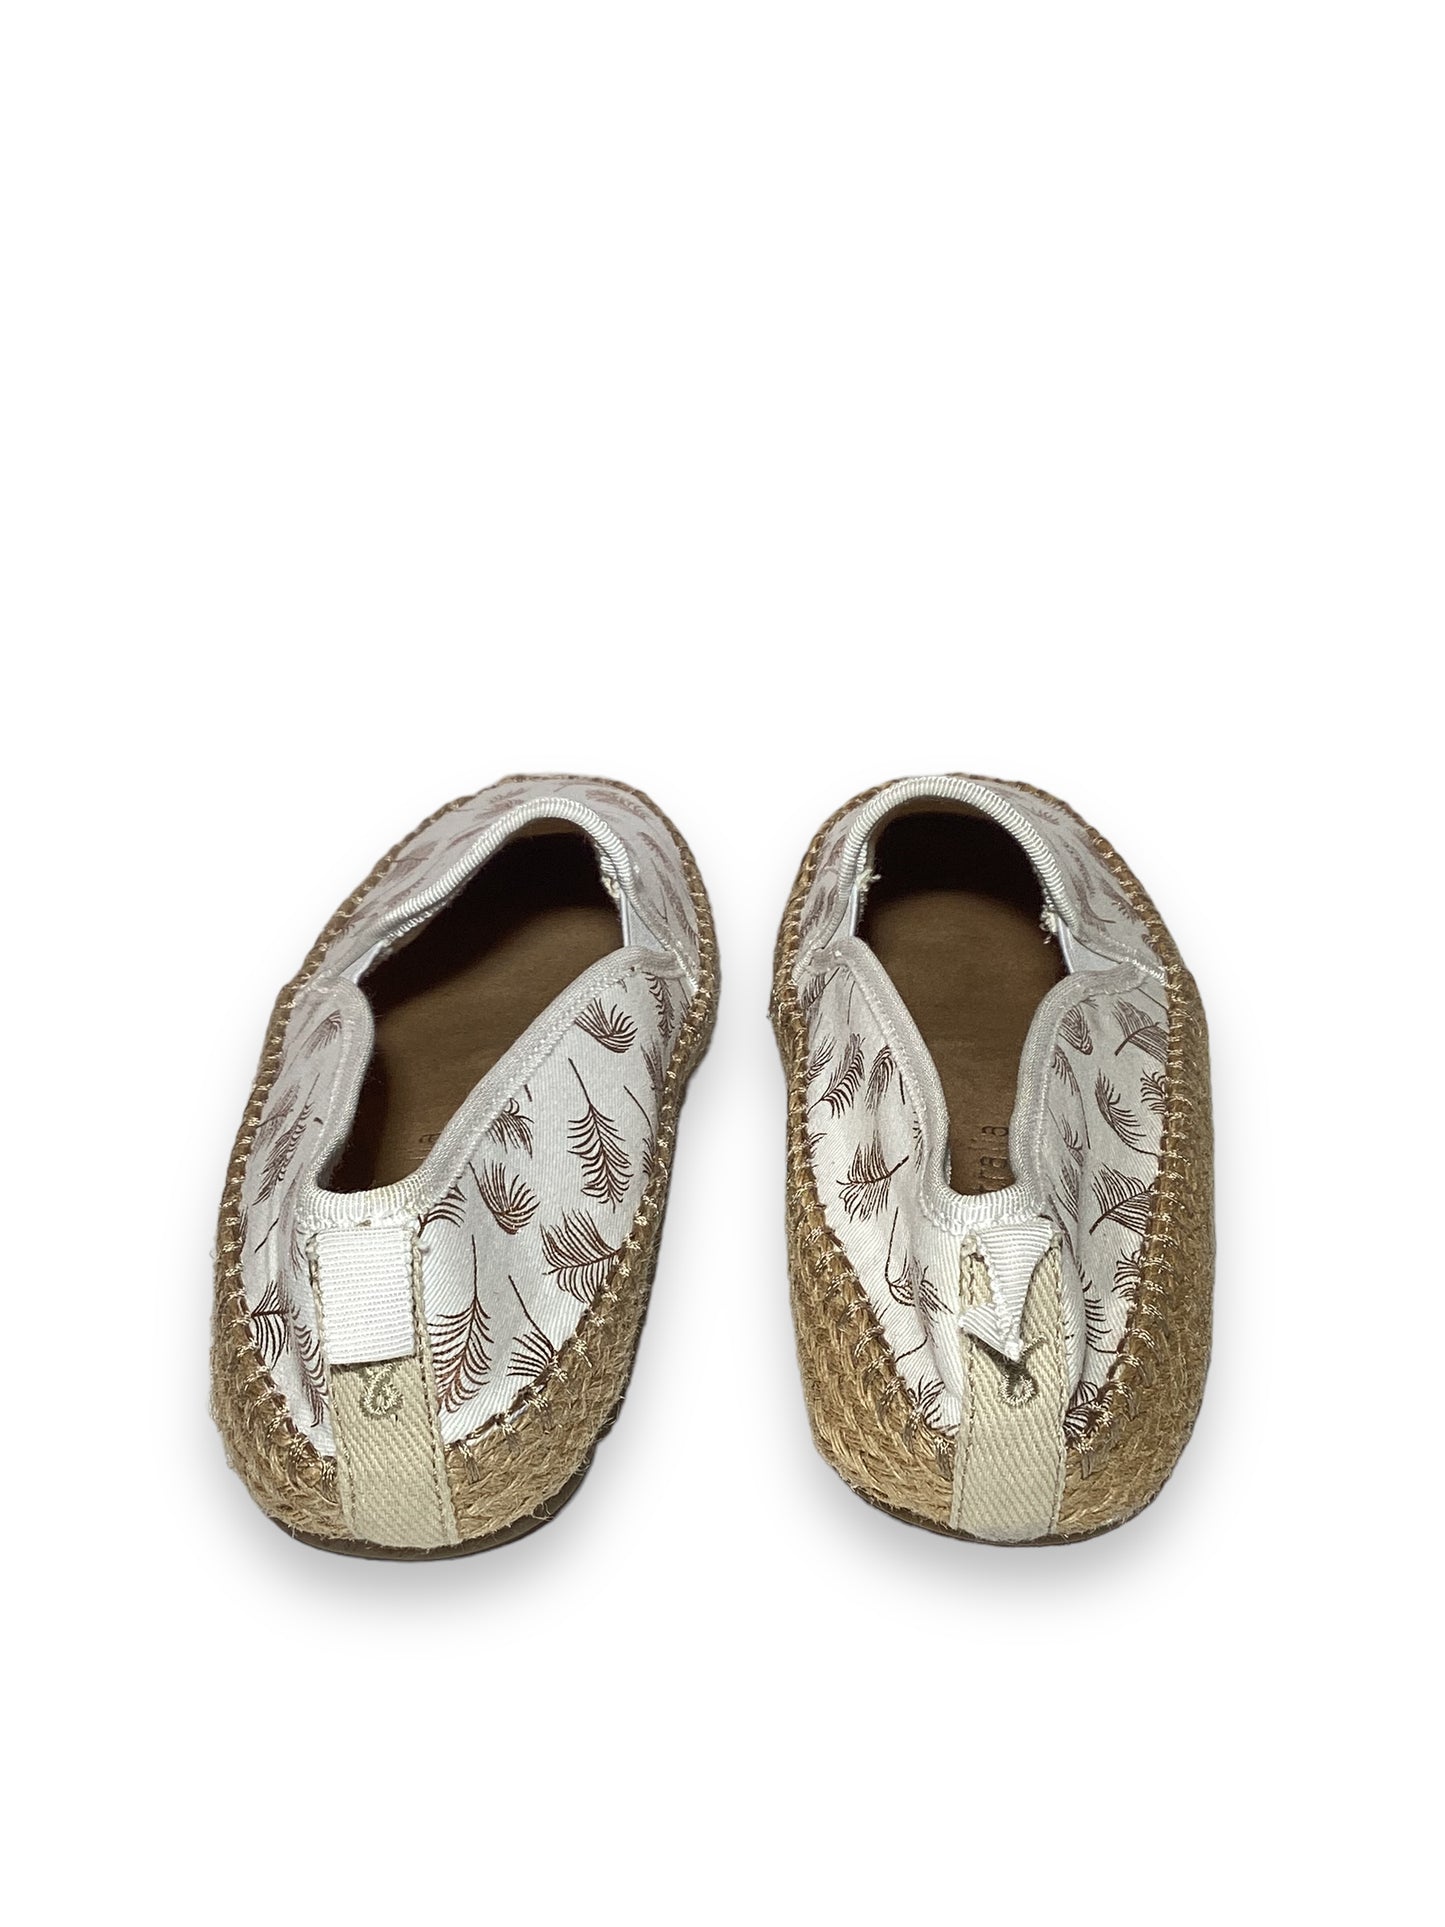 Shoes Flats Moccasin By Emu  Size: 7